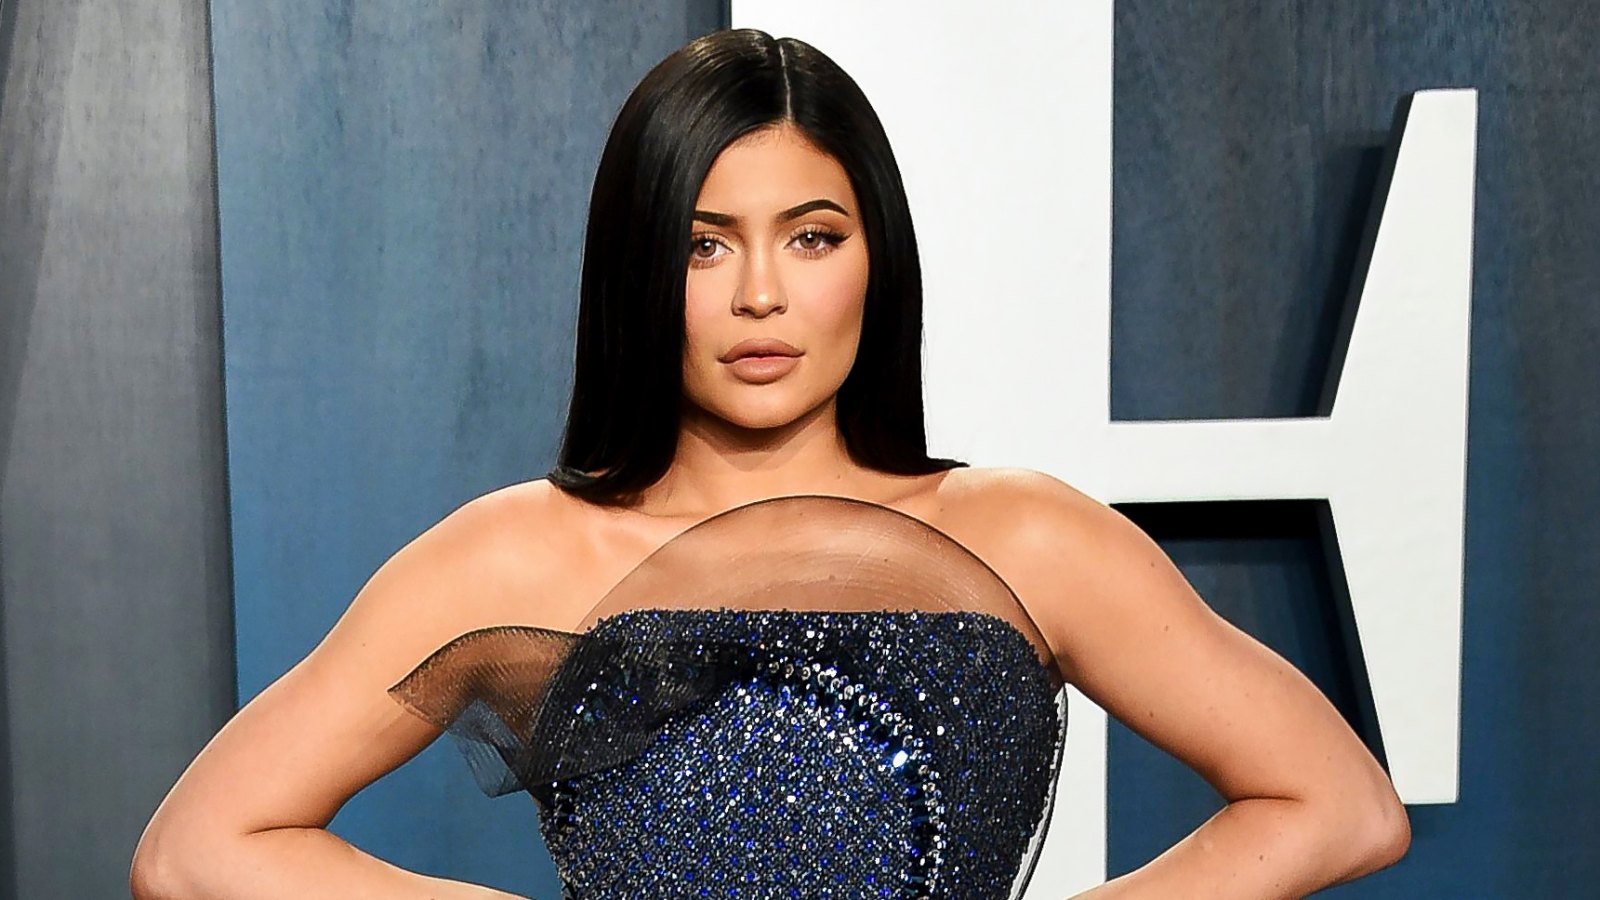 Kylie Jenner Named Youngest Self-Made Billionaire for 2nd Year in a Row